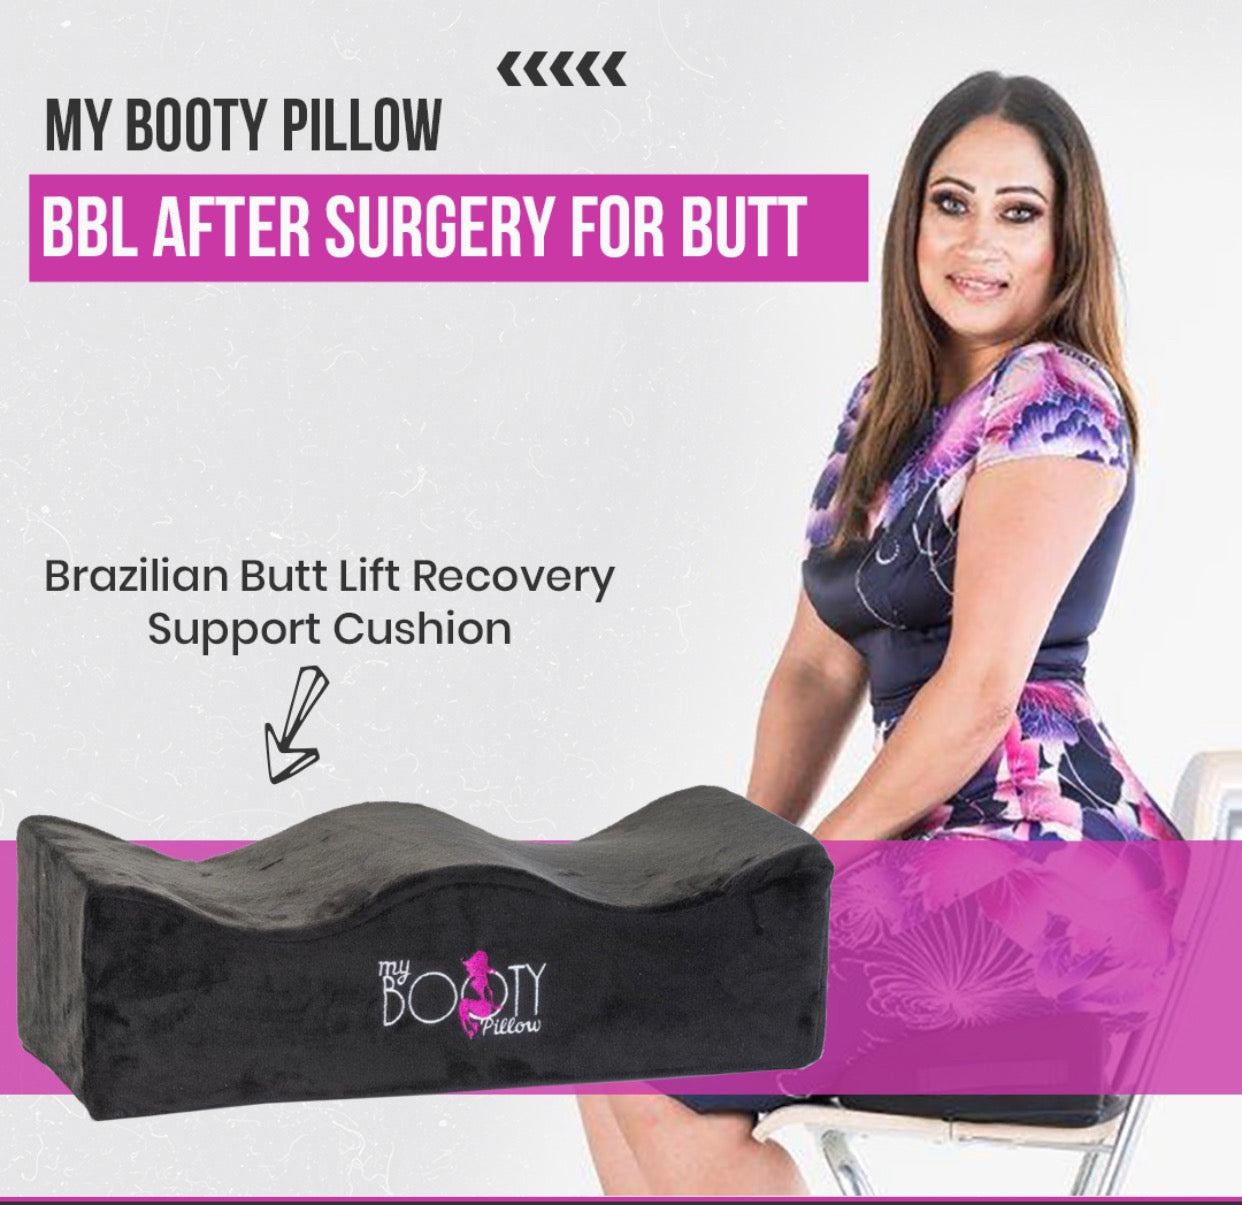 Clearance Sale BBL Pillow After Surgery by Bombshell Booty Pillow